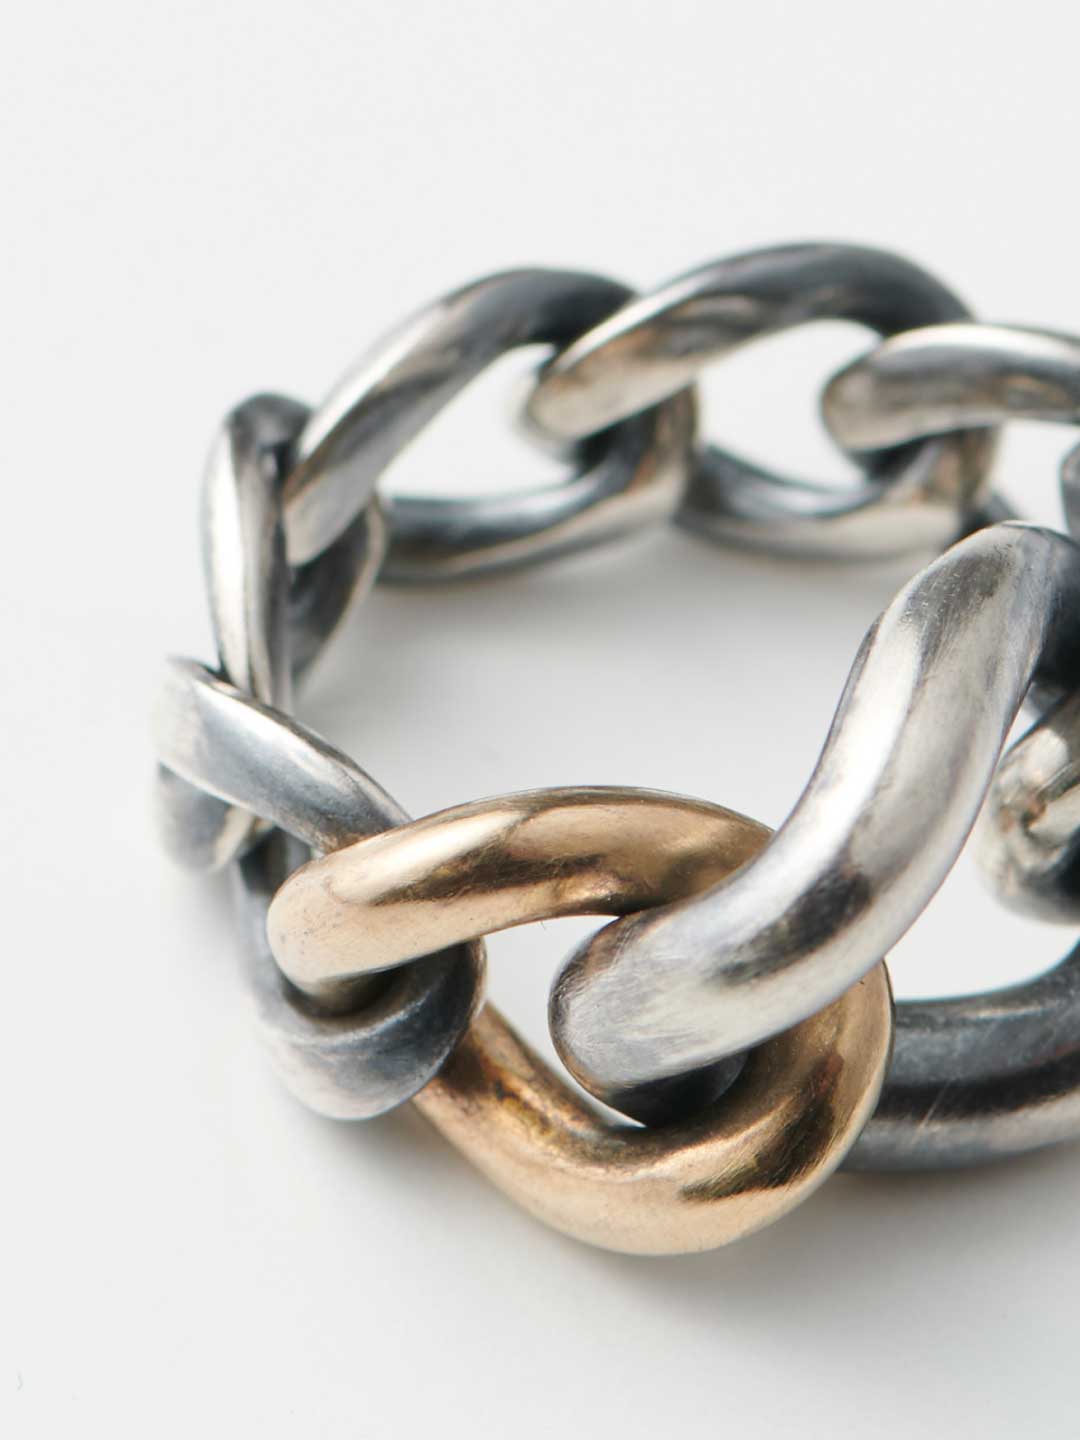 Humete Chain Ring 14 #19 - Silver